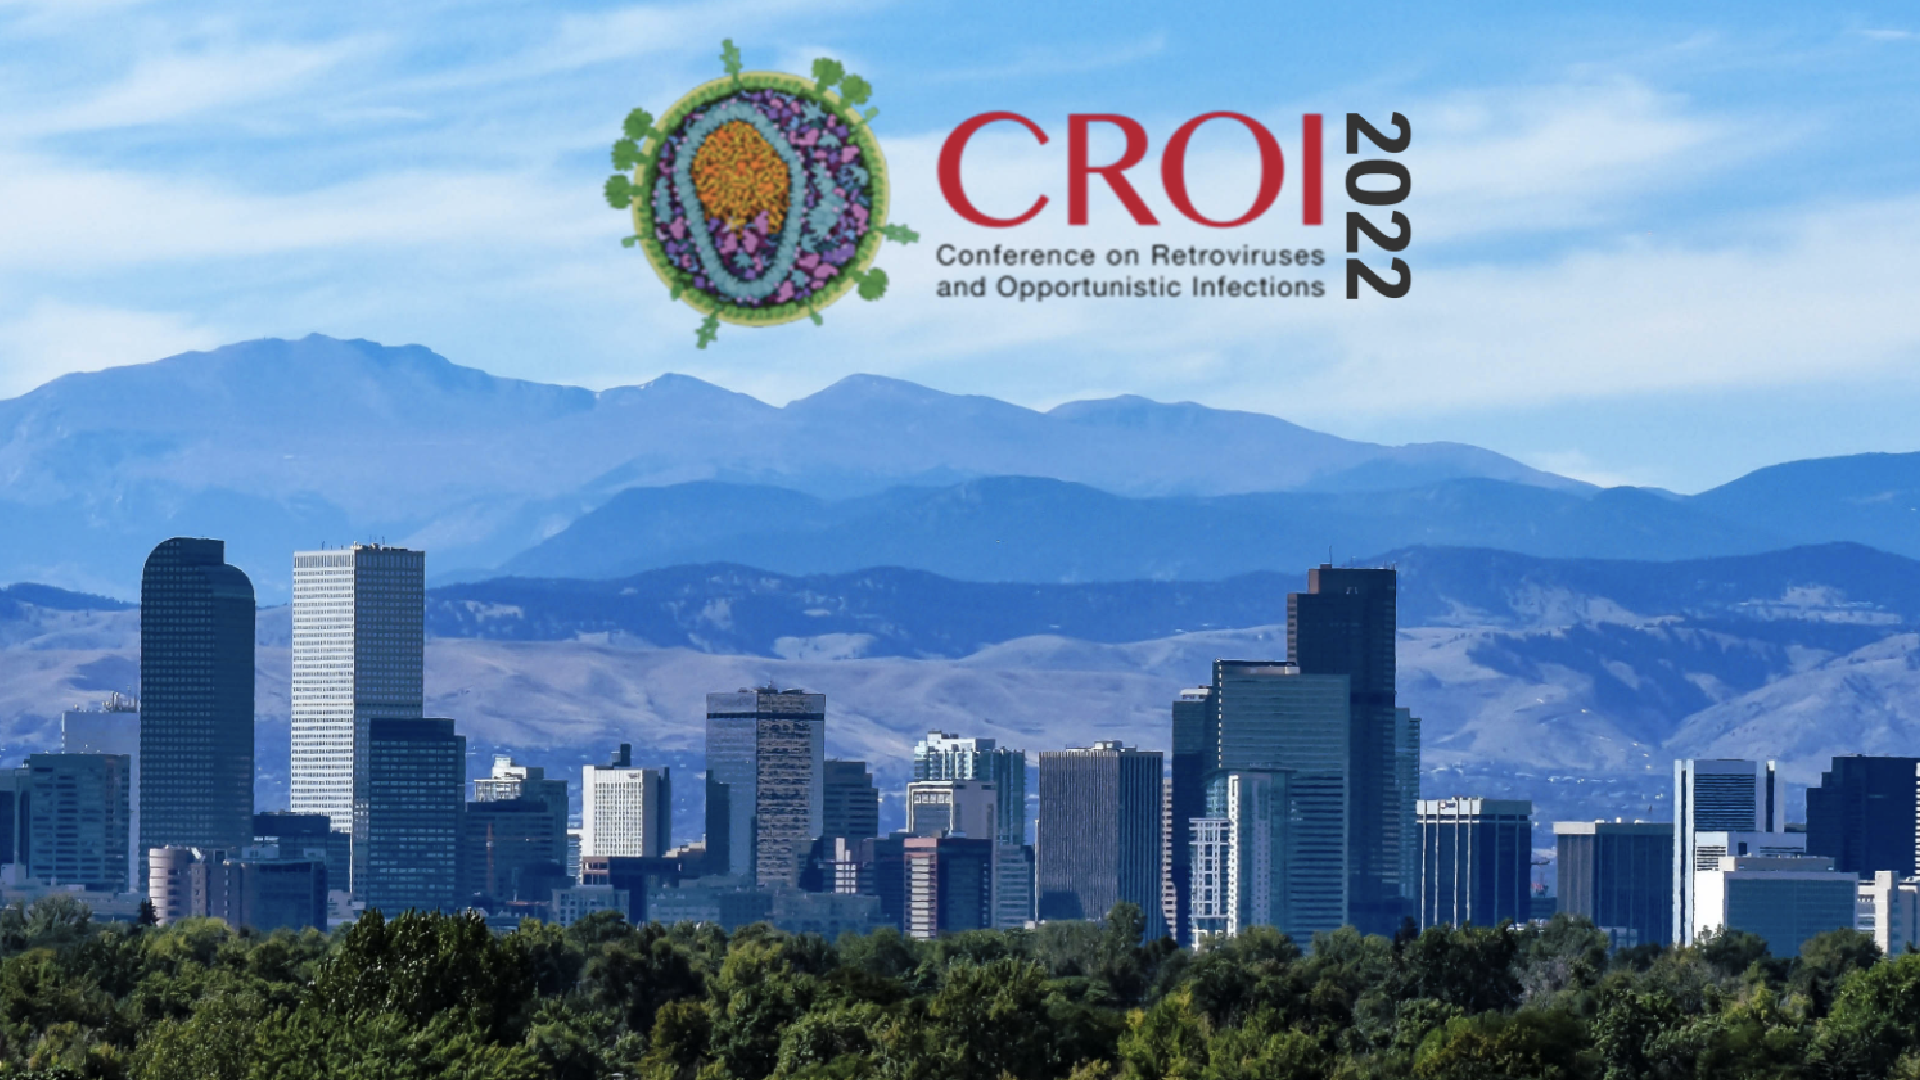 Conference on Retroviruses and Opportunistic Infections (CROI) 2022